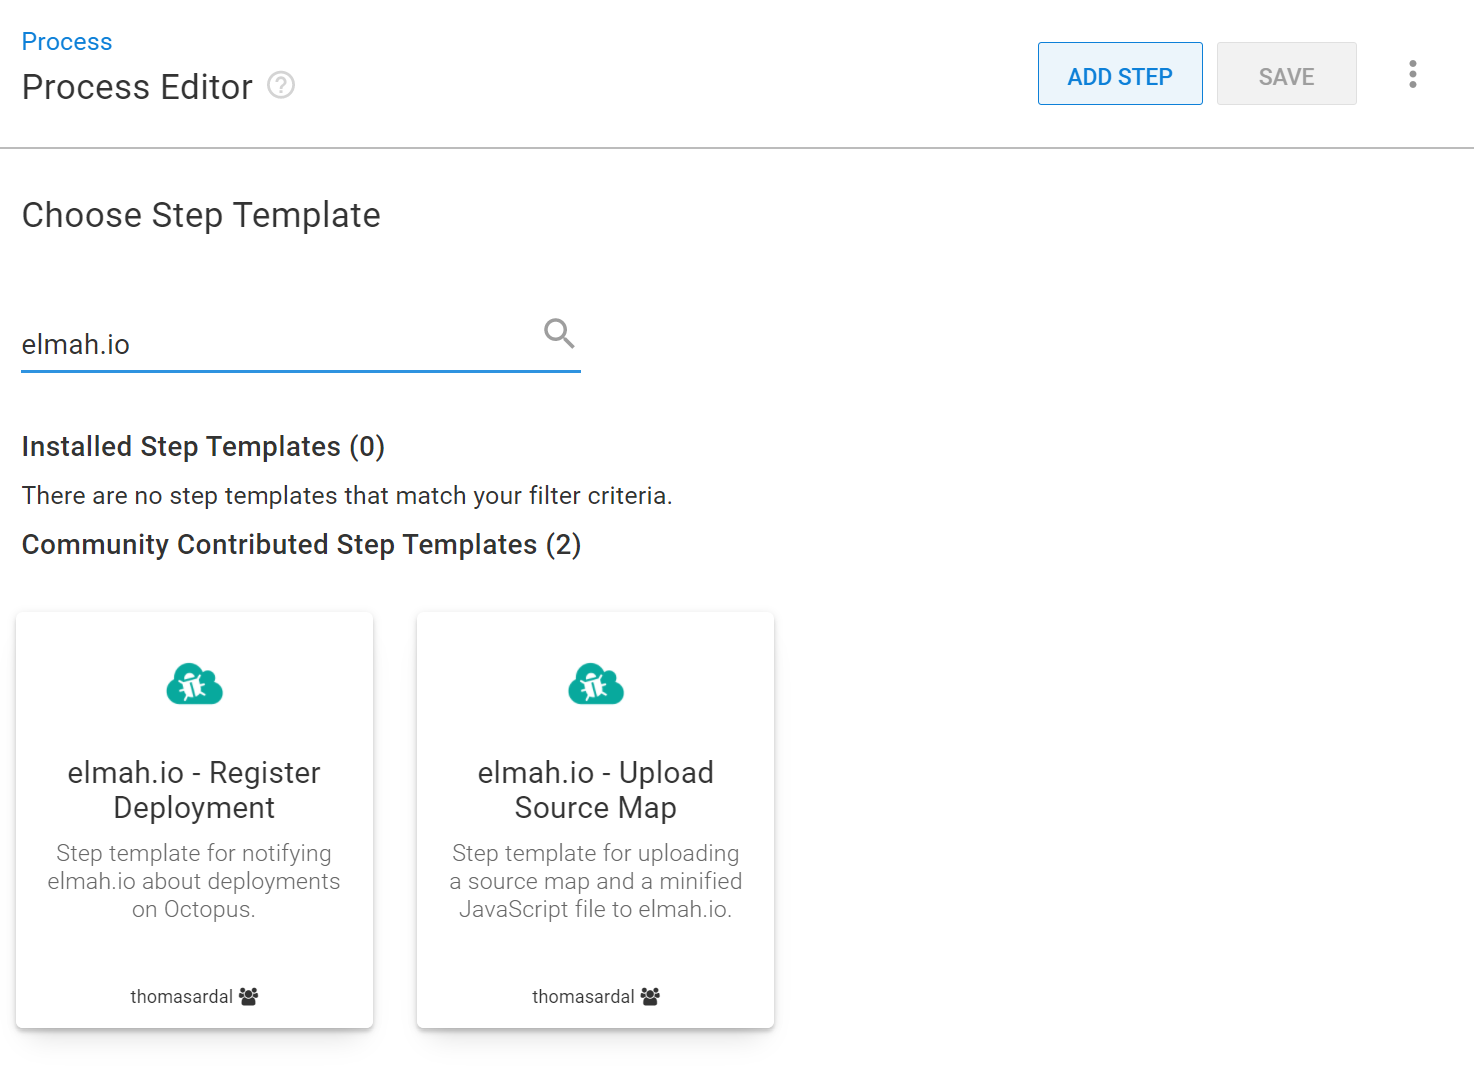 Search step template